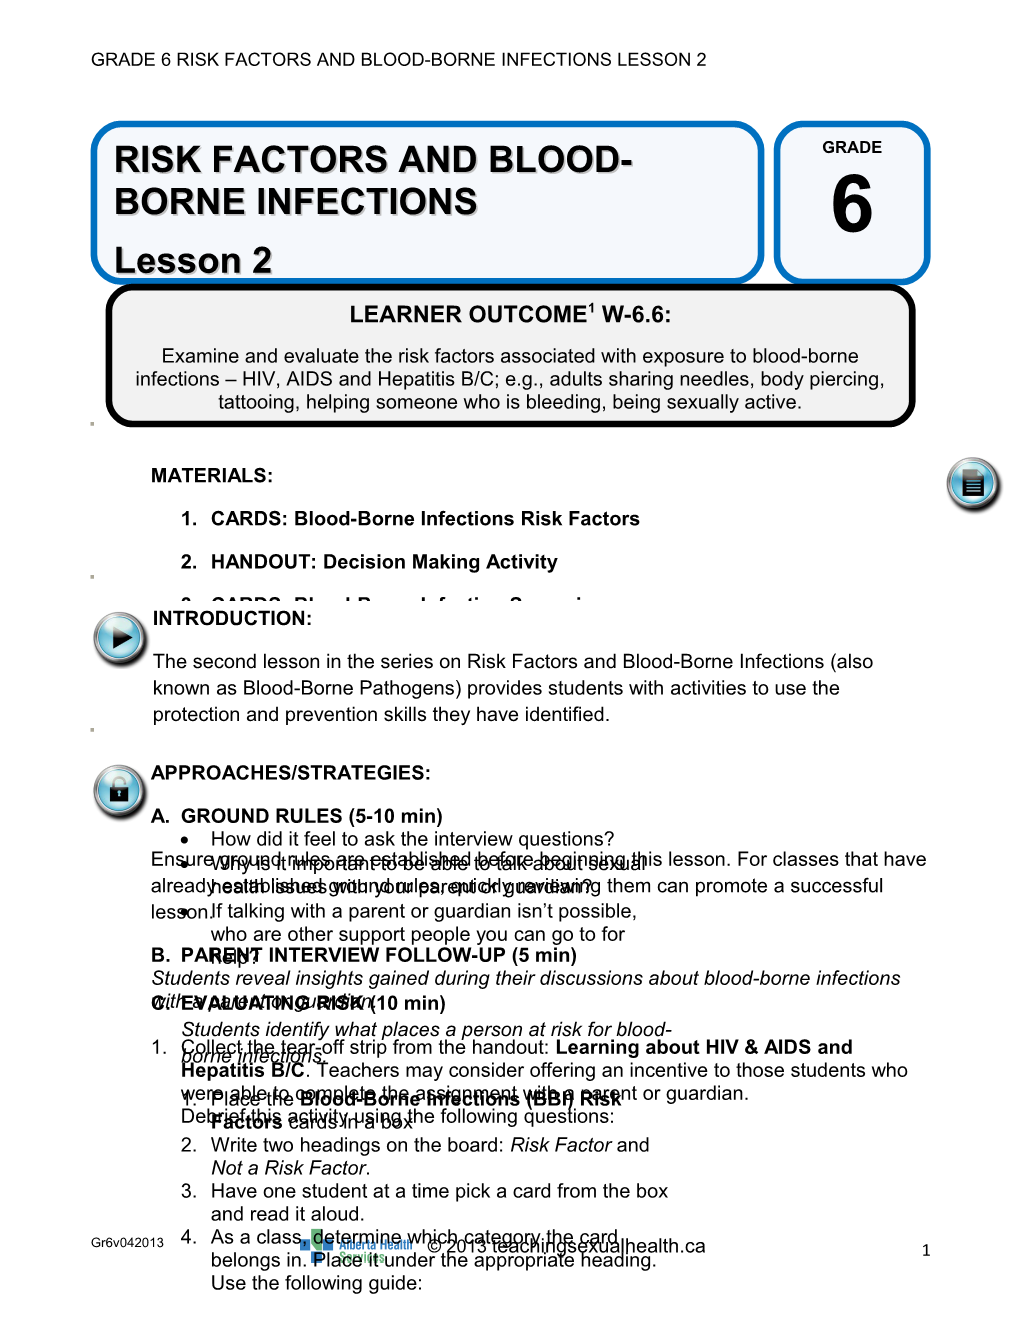 Grade 6 Risk Factors and Blood-Borne Infections Lesson 2